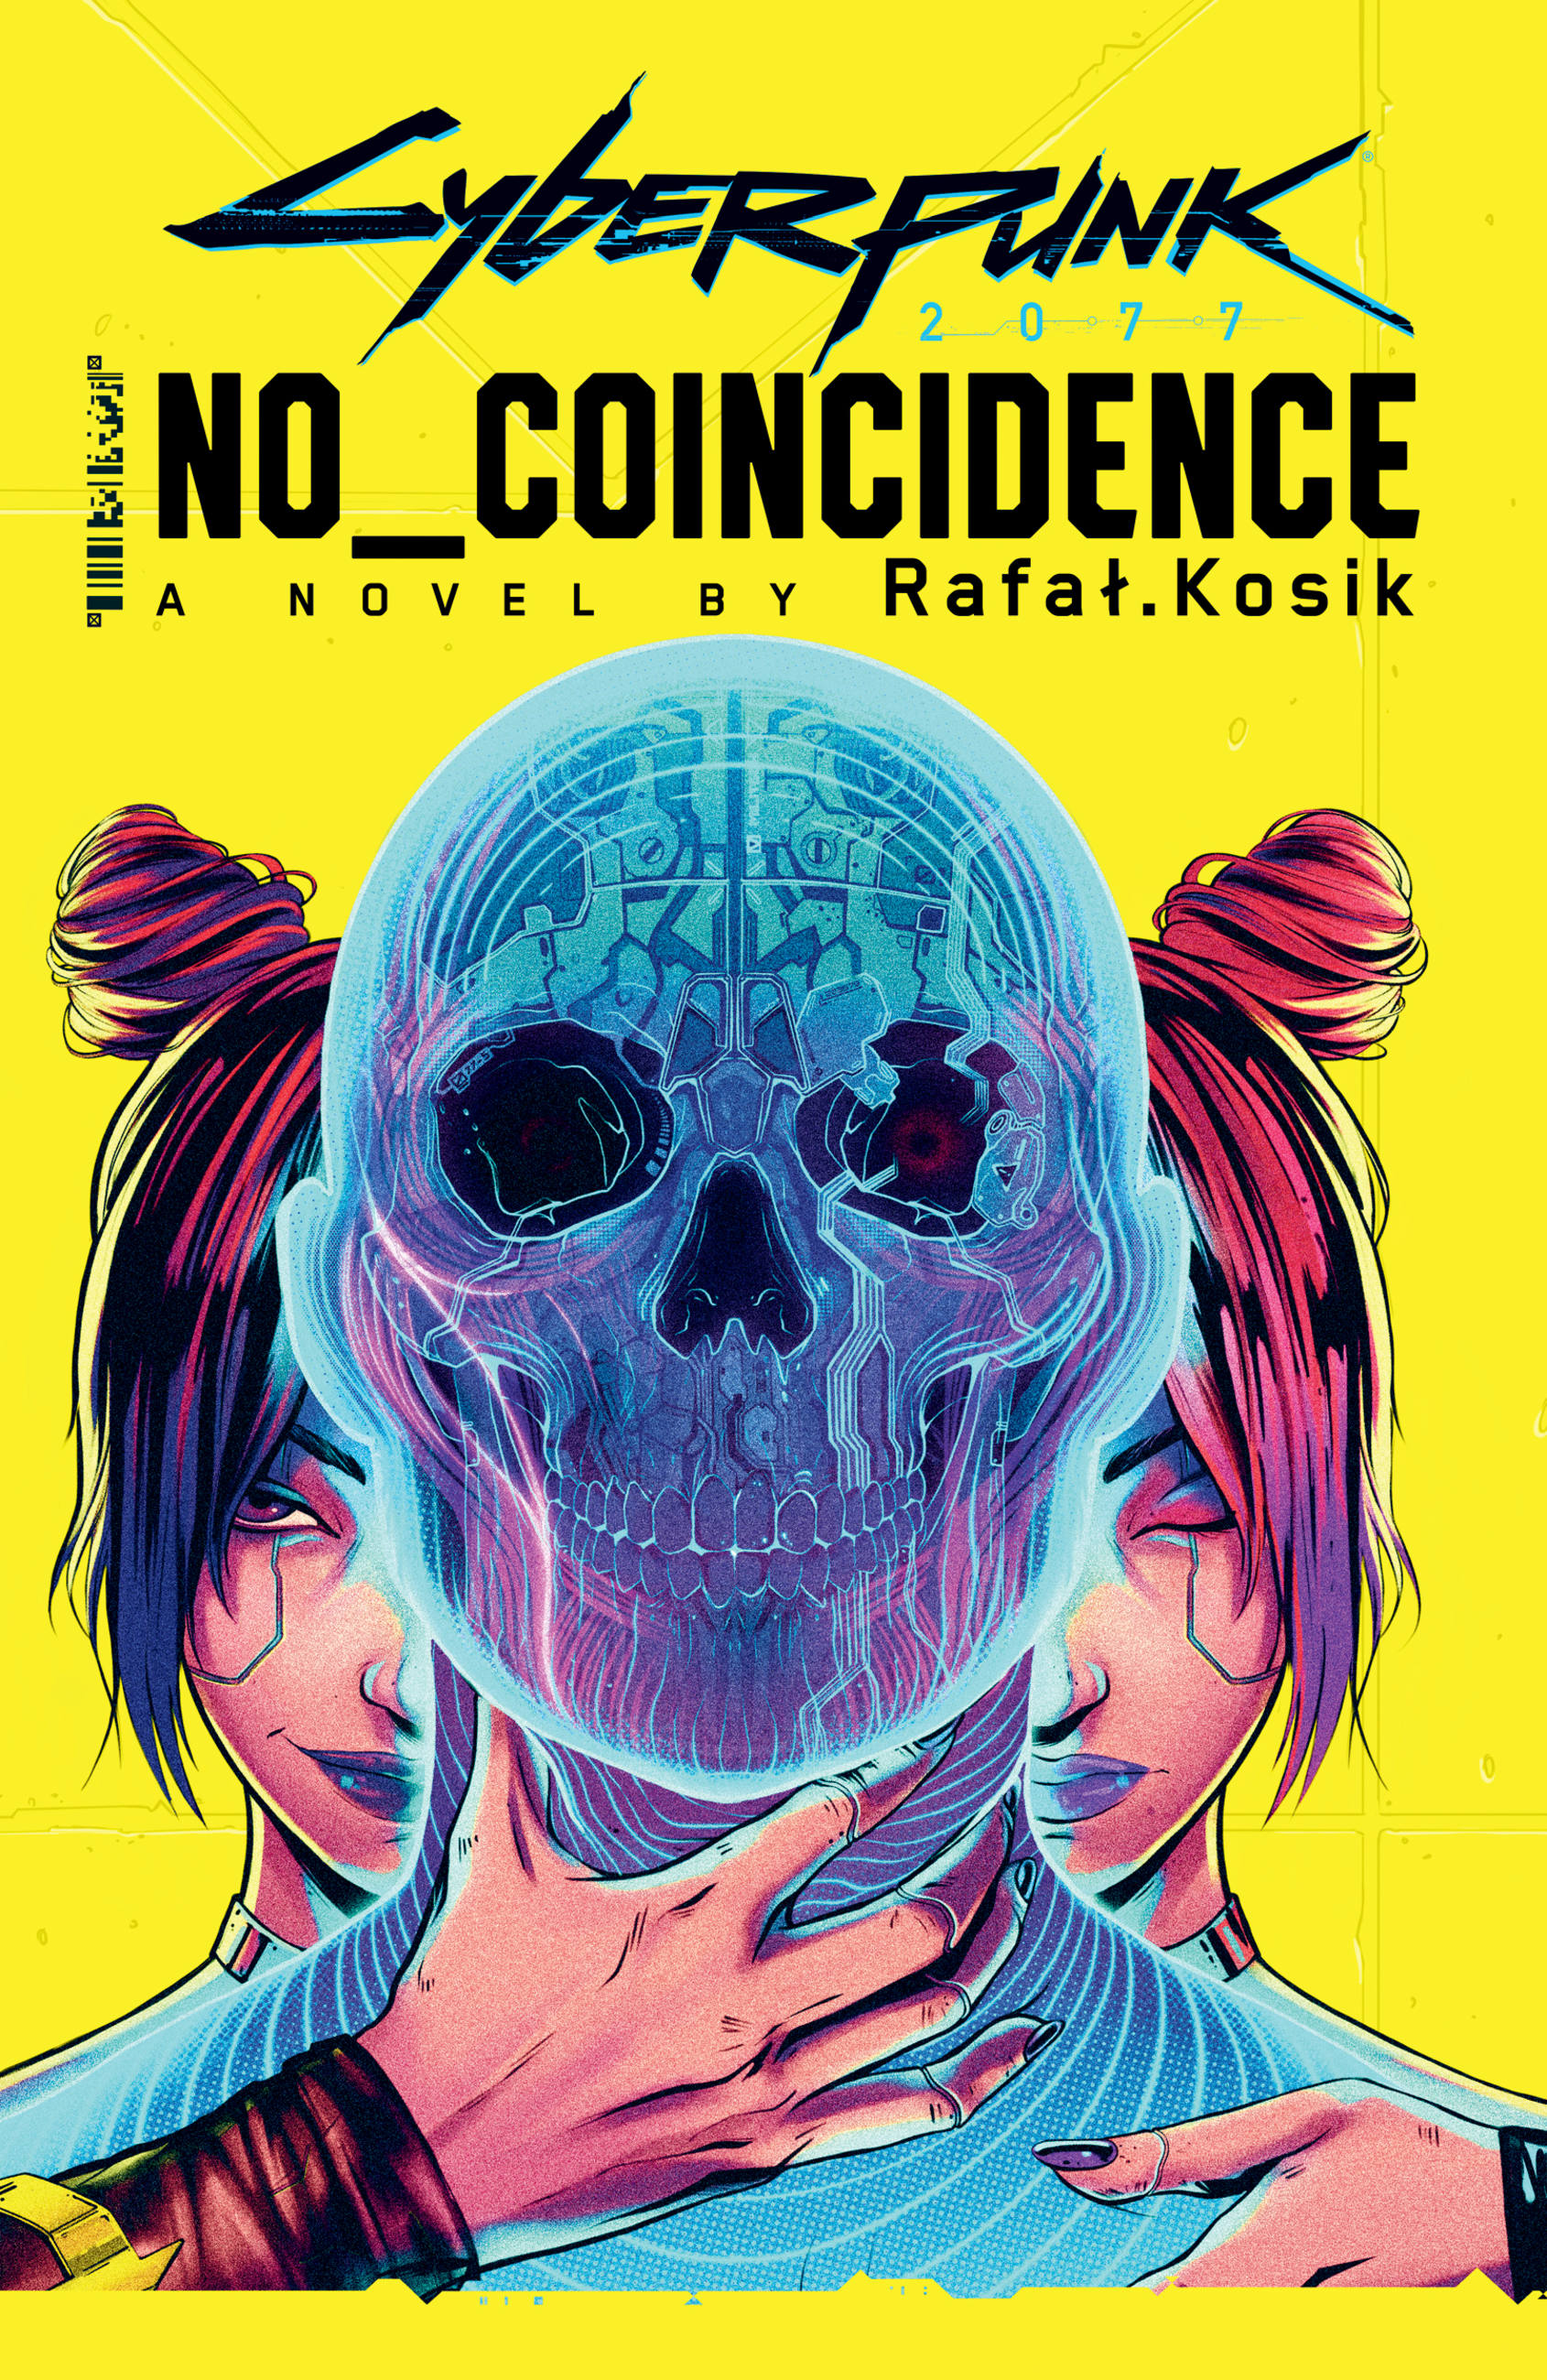 Cyberpunk 2077 No Coincidence by Rafal Kosik Hachette Book Group